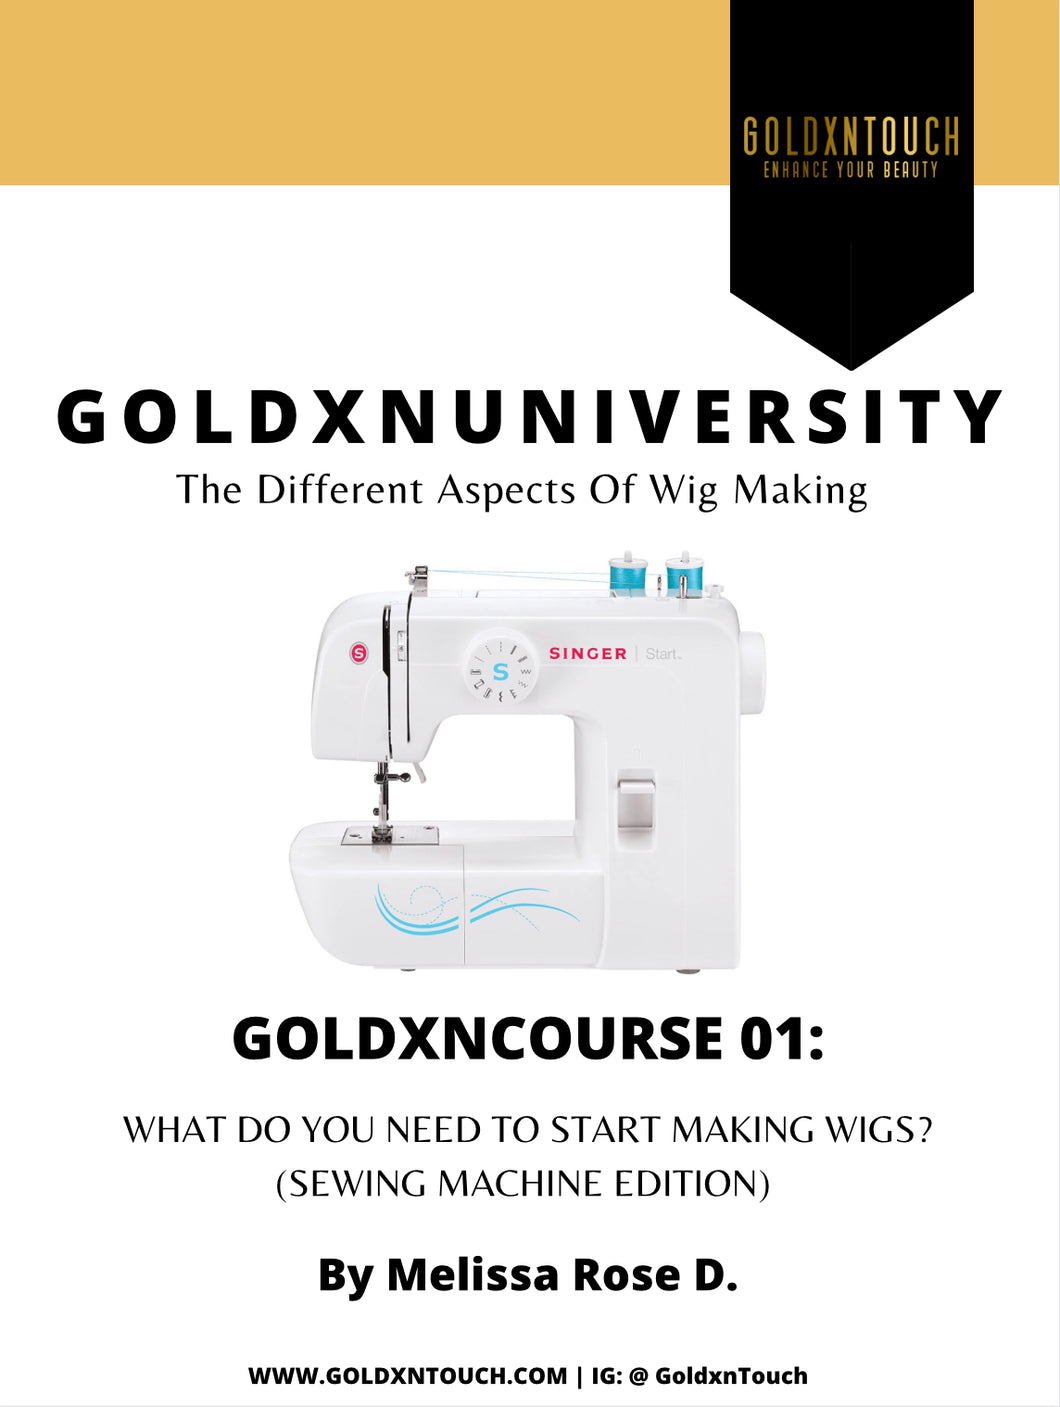 GoldxnCourse 01 : WHAT DO YOU NEED TO START MAKING WIGS? (SEWING MACHINE EDITION)